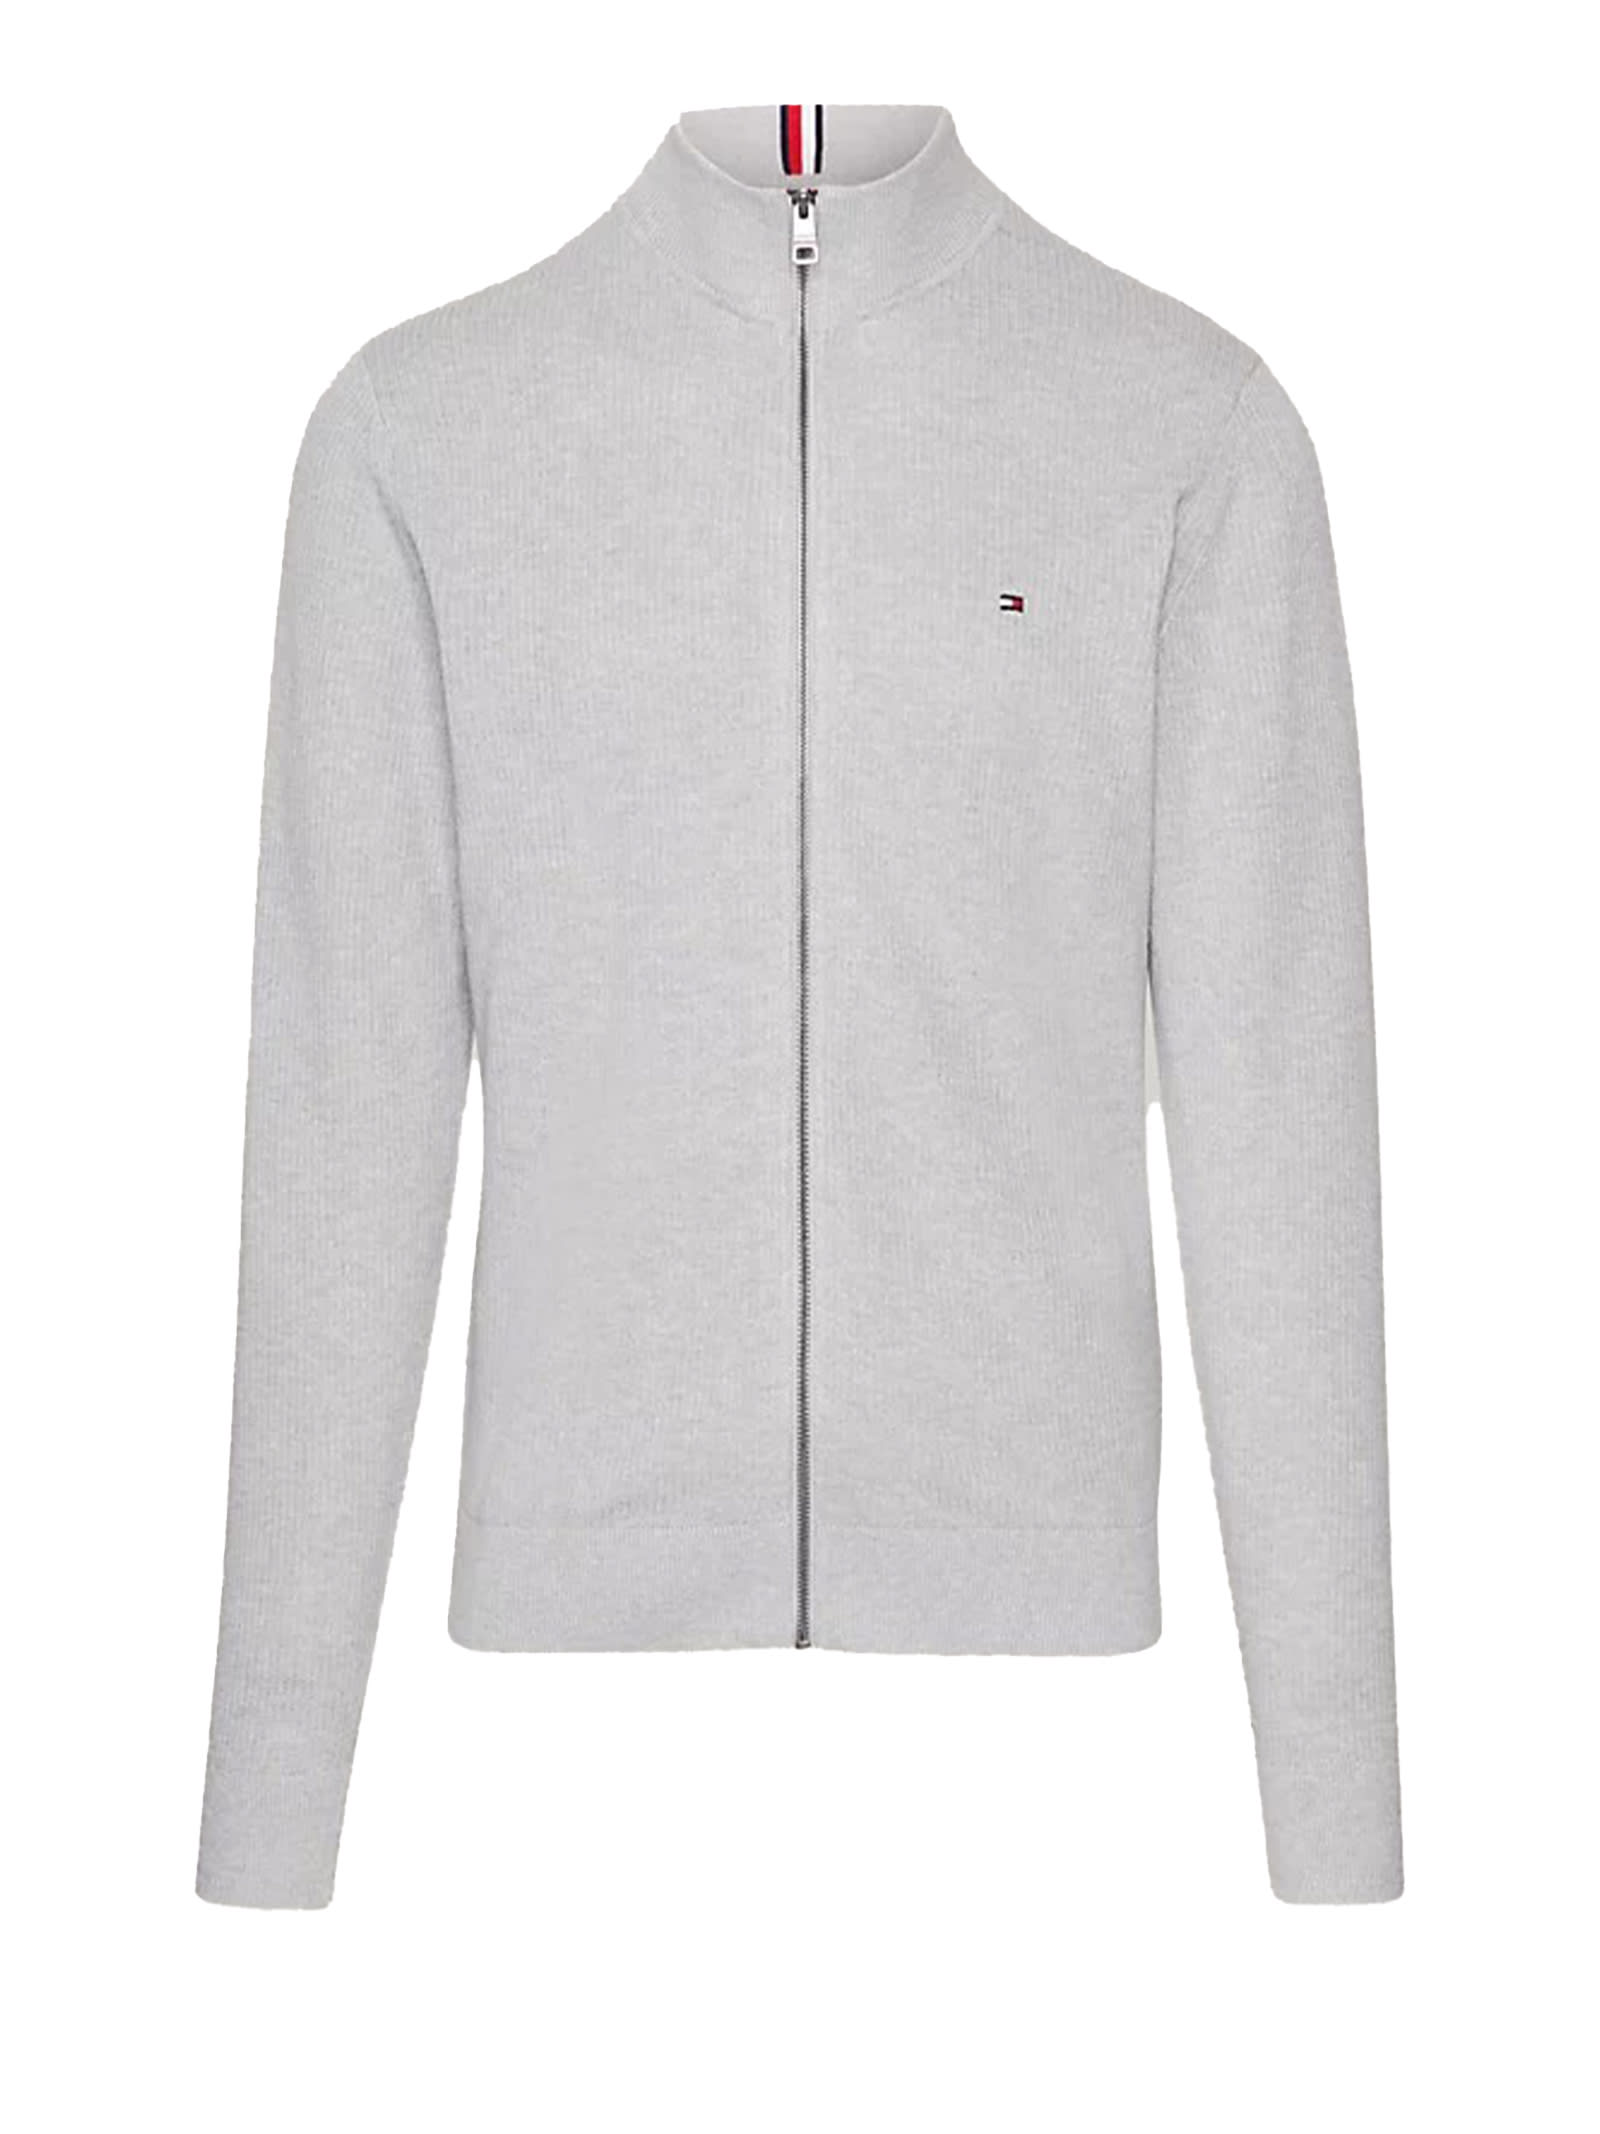 Shop Tommy Hilfiger Textured Cardigan With Full Zip In Light Grey Heather